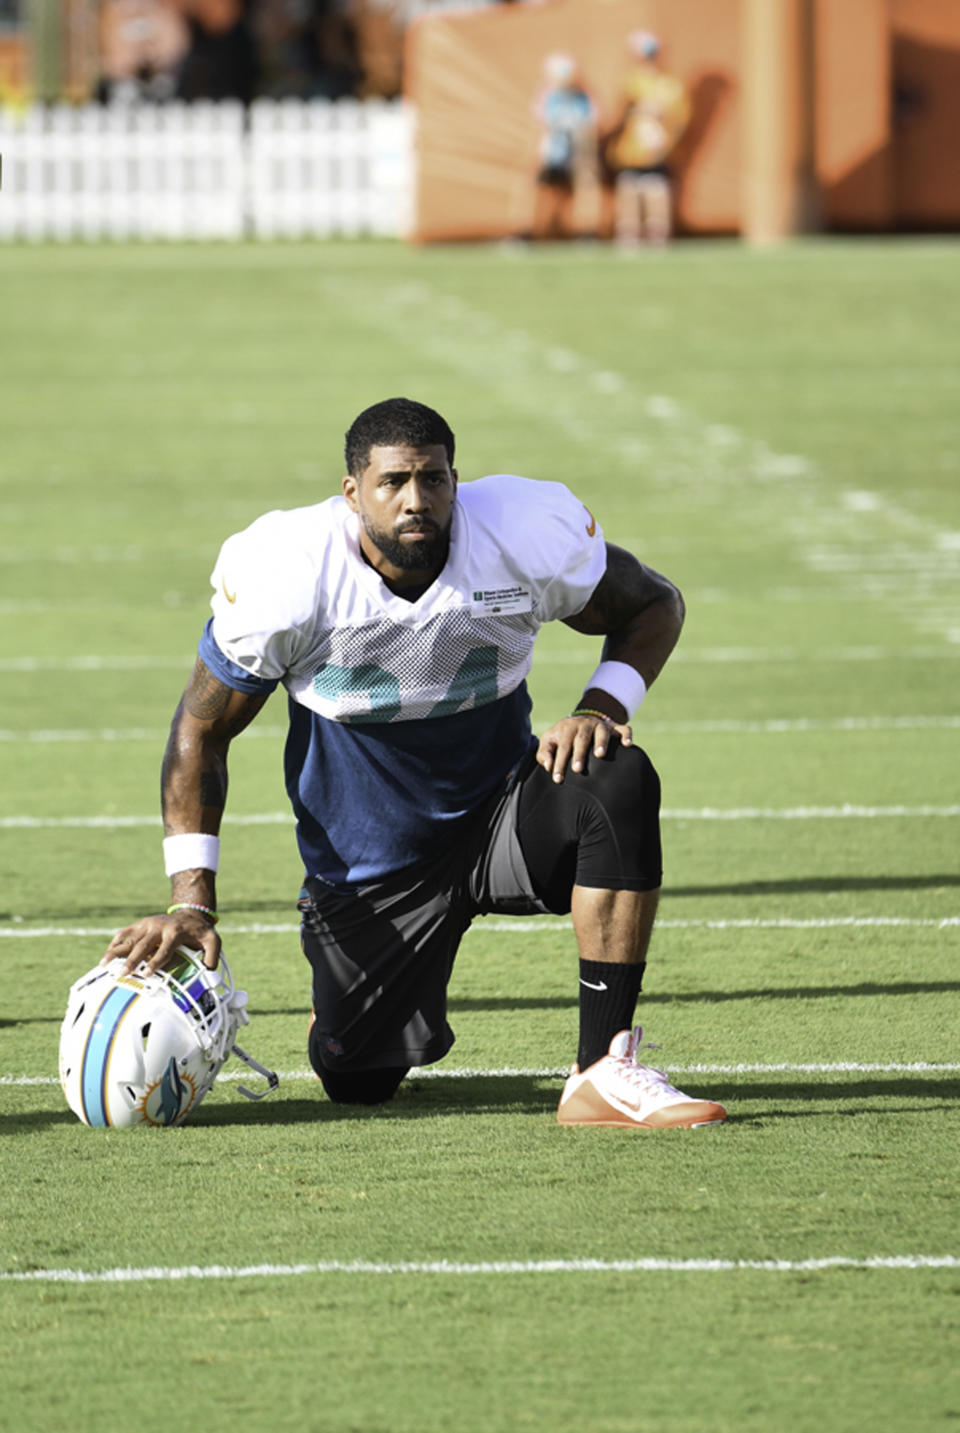 Arian Foster looks on during Miami Dolphins training camp on July 31, 2016. (Photo by Ron Elkman/Sports Imagery/Getty Images)